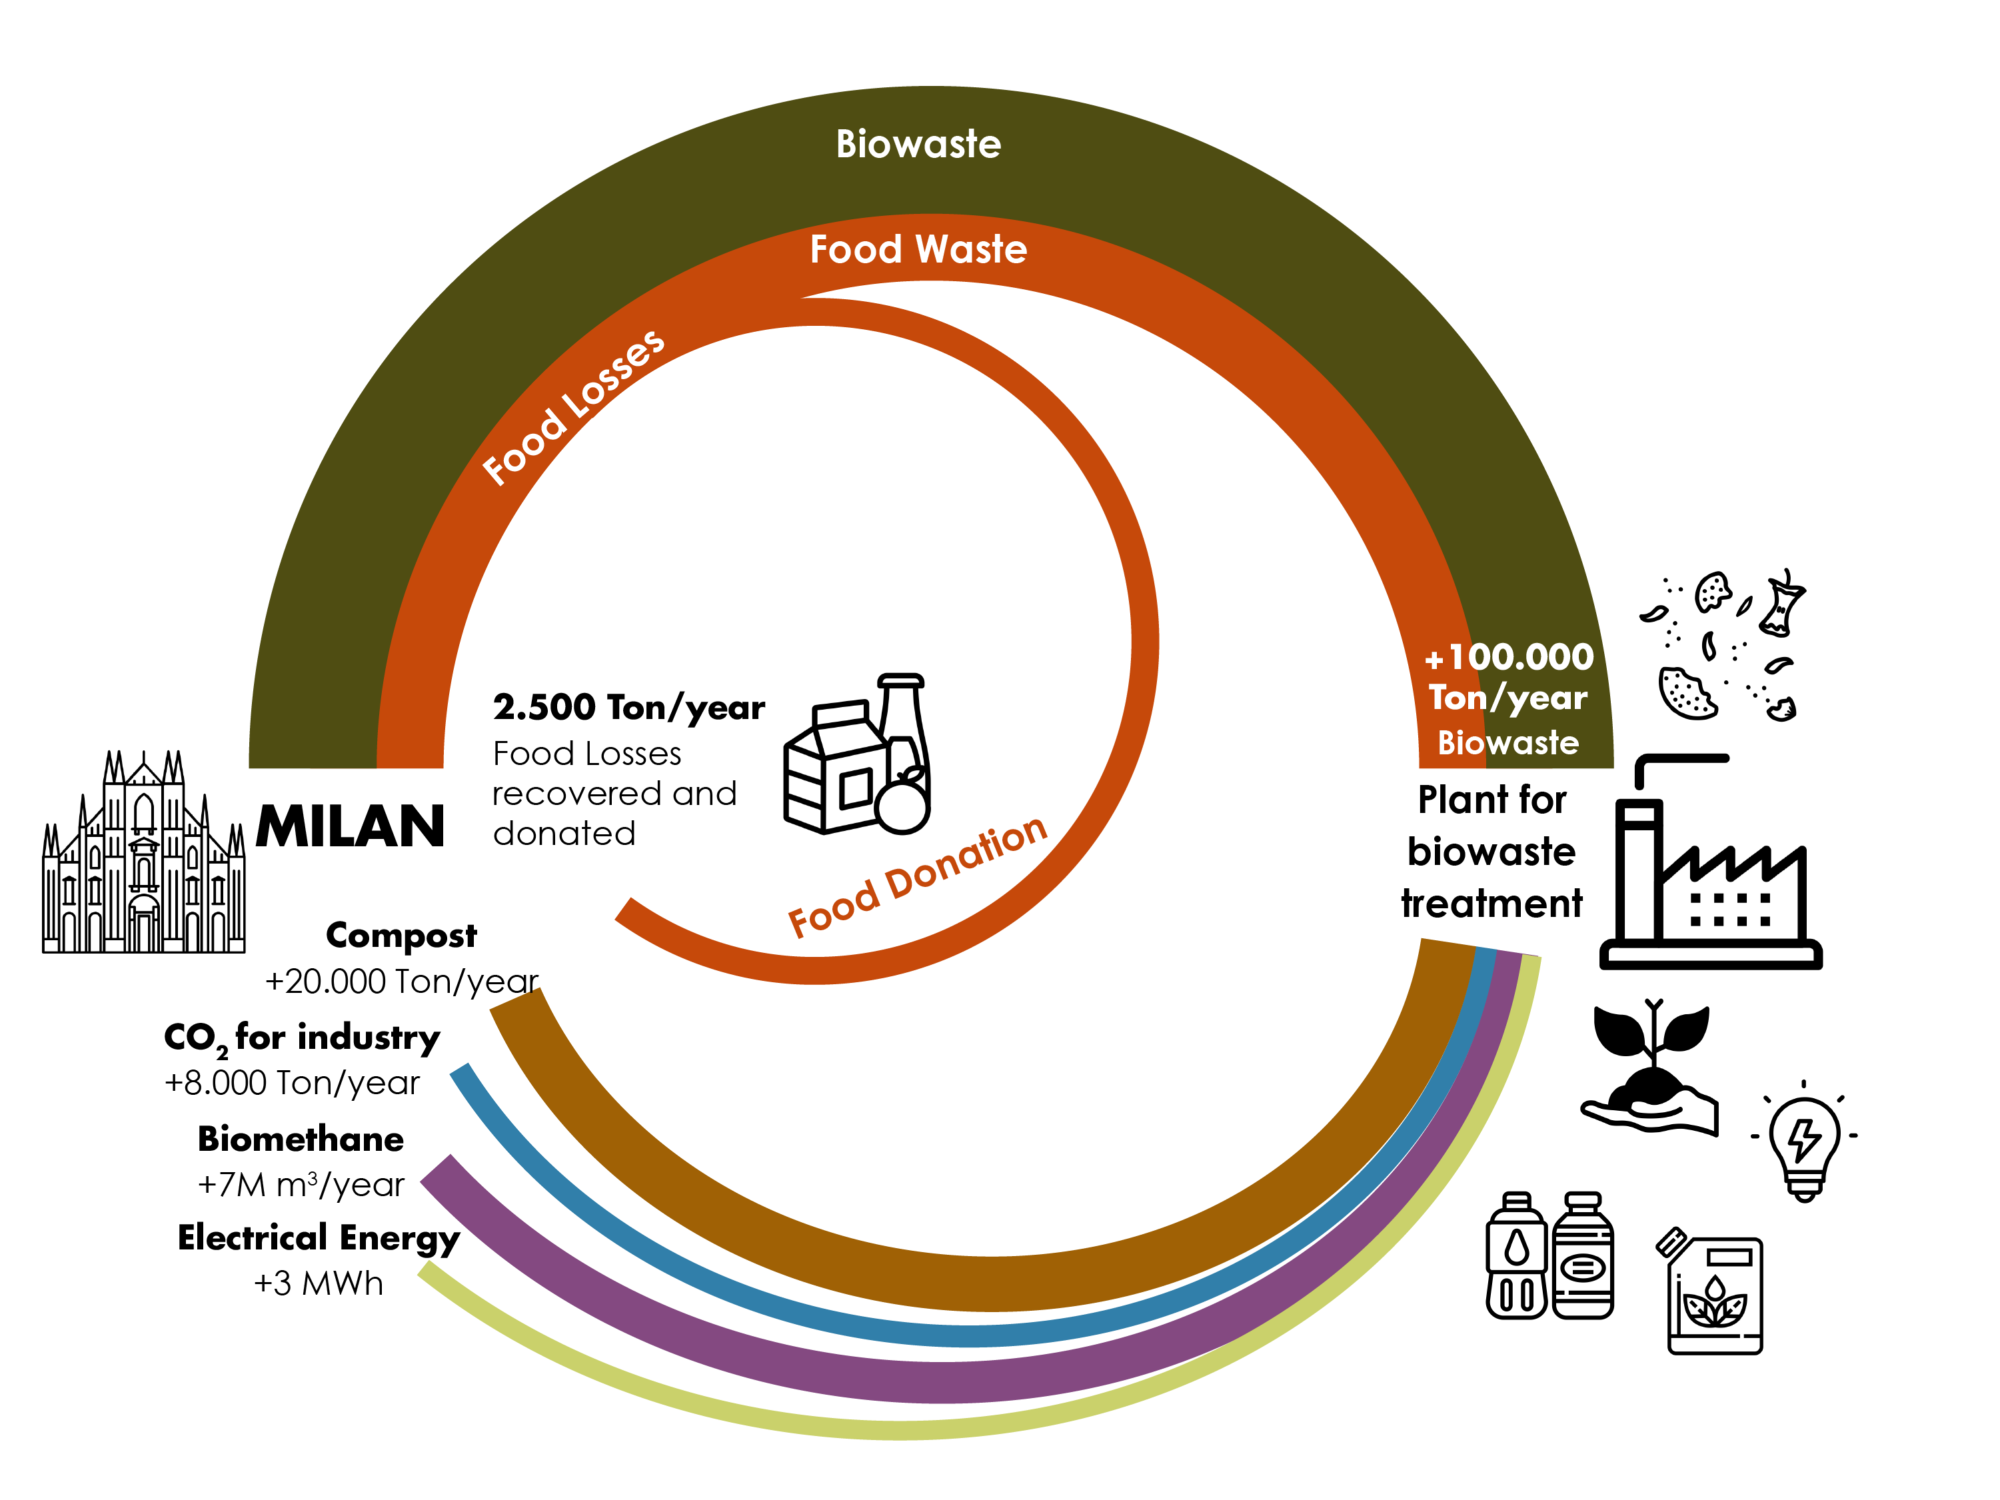 Milan biowaste cycle - infographic from Municipal office